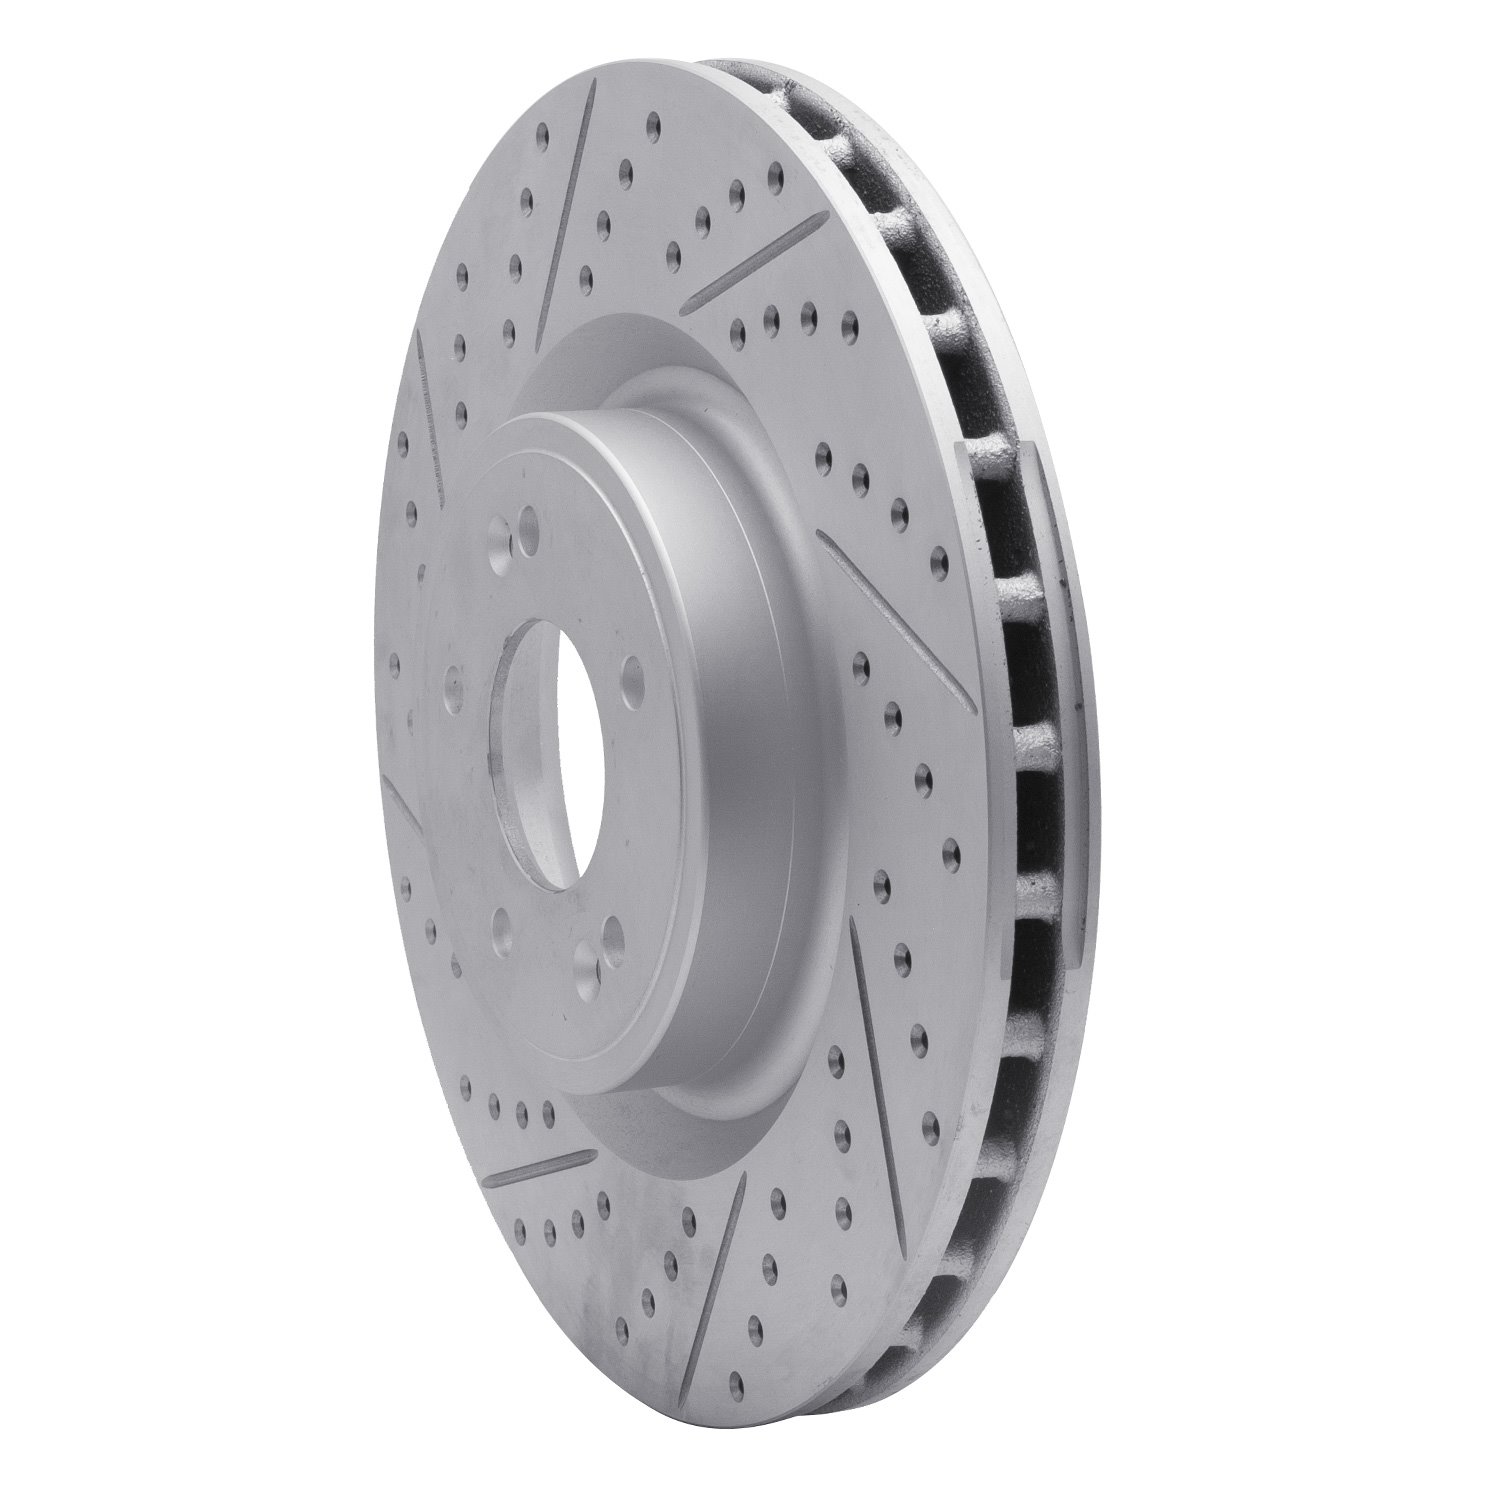 830-21038L Geoperformance Drilled/Slotted Brake Rotor, Fits Select Kia/Hyundai/Genesis, Position: Front Left